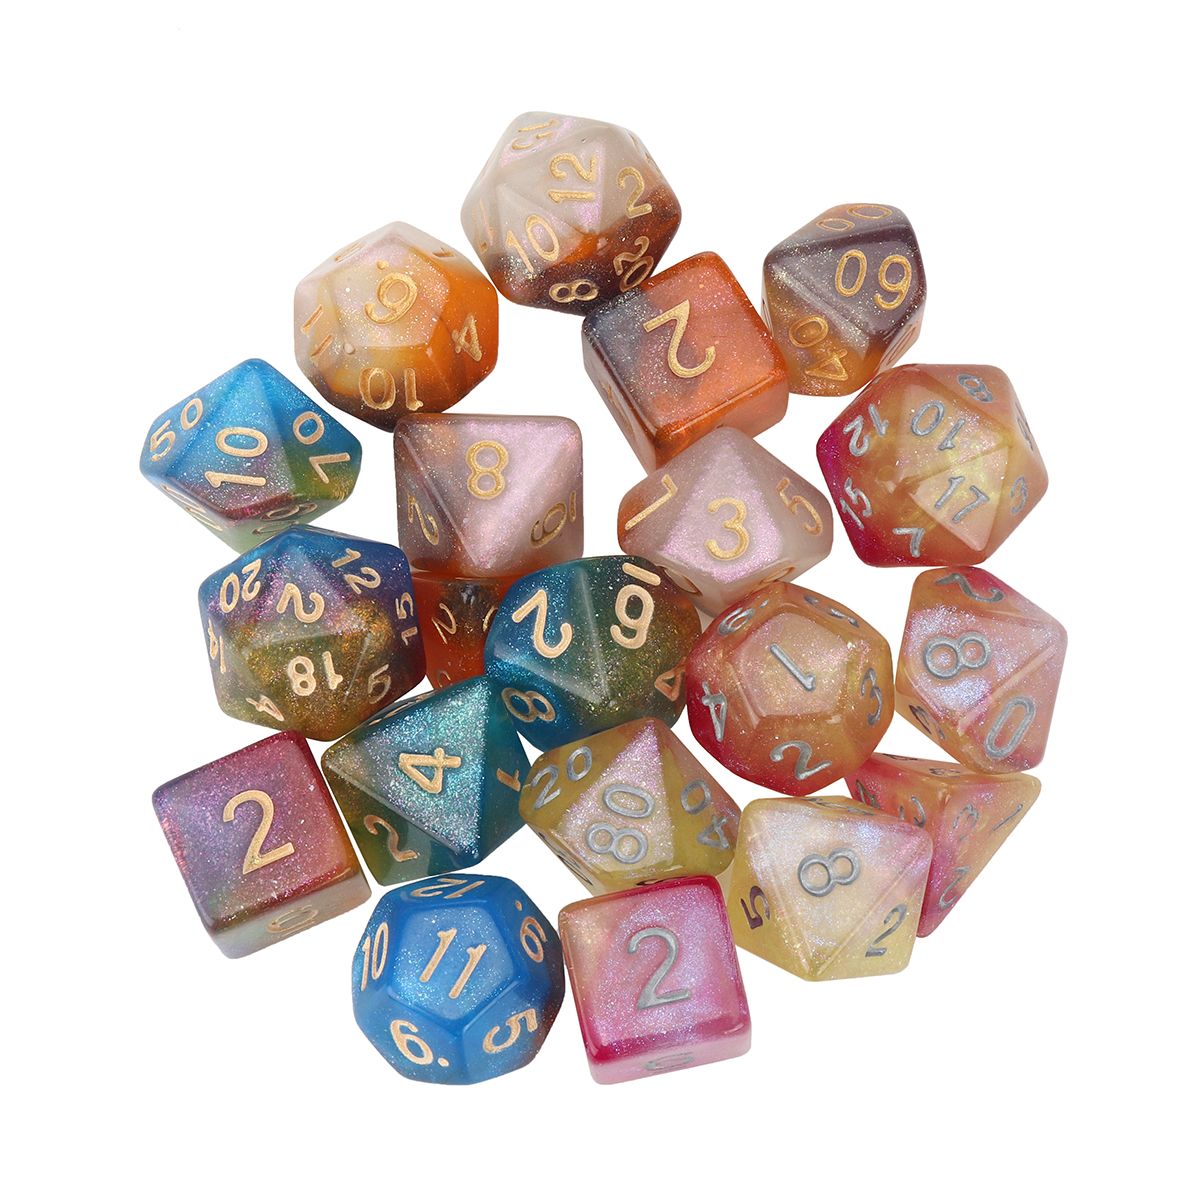 7Pcs-Polyhedral-Dice-Set-Board-Game-Multisided-Dices-Gadget-Acrylic-Polyhedral-Dices-Role-Playing-Ga-1700348